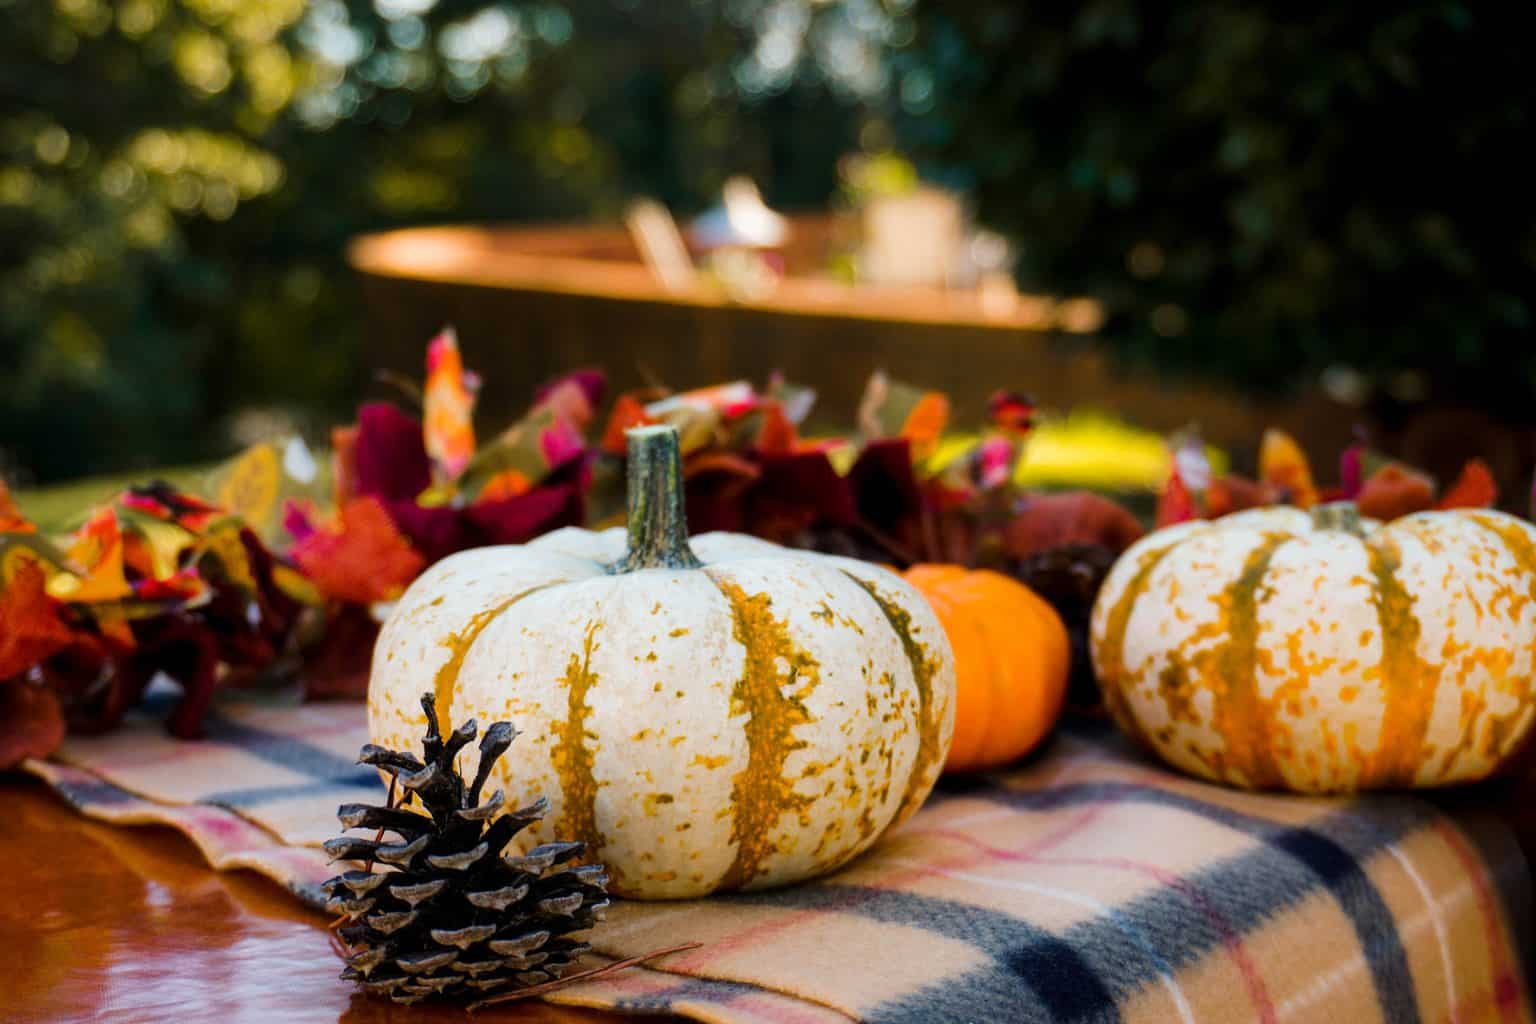 A table arranged with pumpkins and leaves as display on top